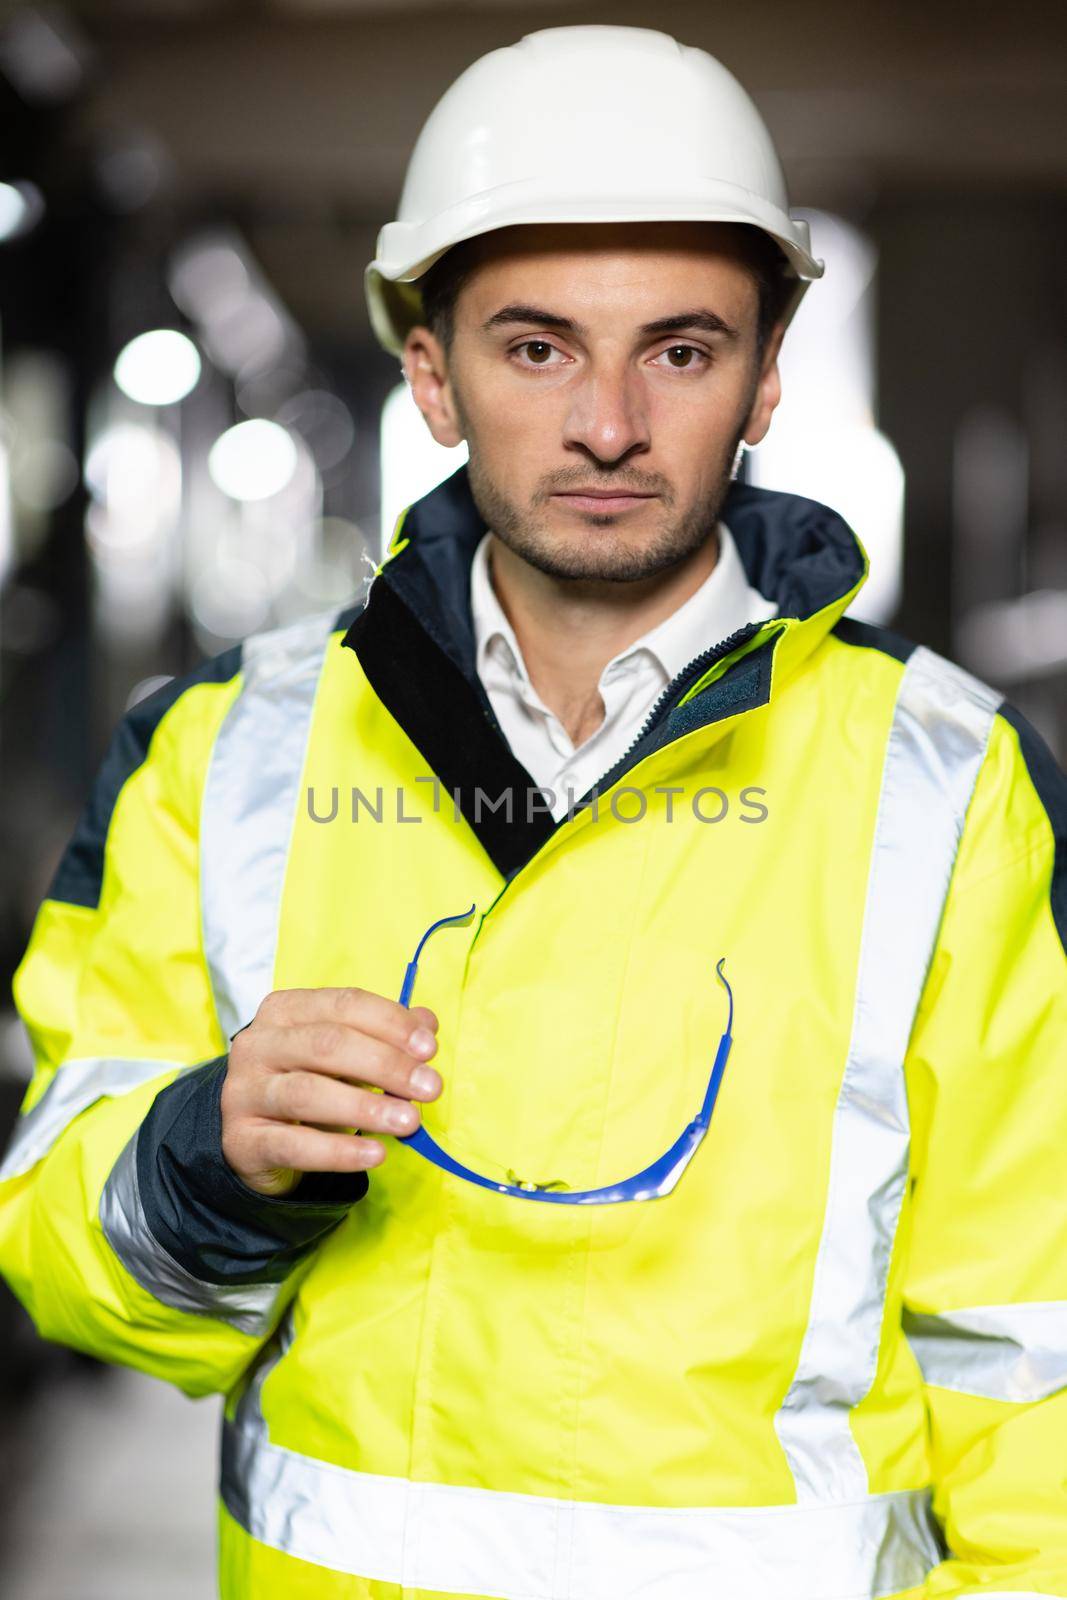 Professional Heavy Industry Engineer Worker Wearing Uniform, Glasses and Hard Hat in a Steel Factory Looks at Camera. Caucasian Industrial Specialist Standing in a Metal Construction Manufacture by uflypro